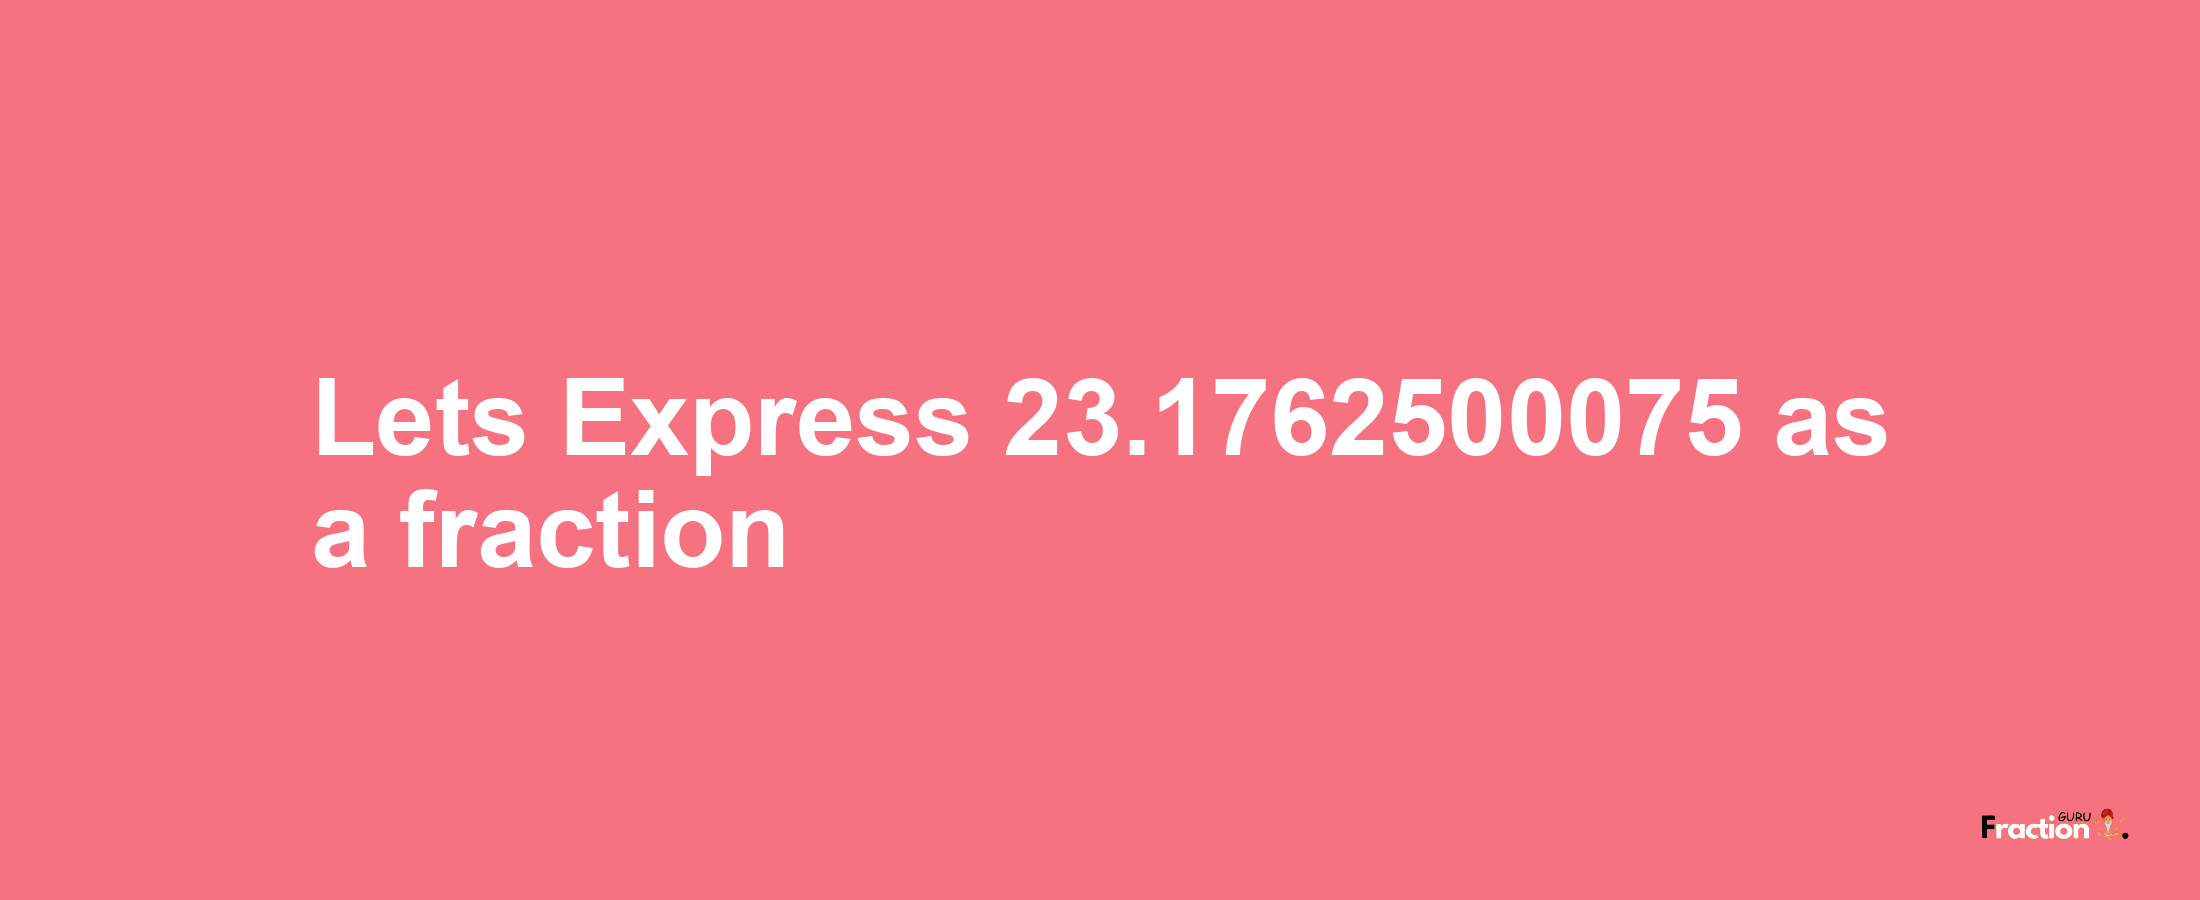 Lets Express 23.1762500075 as afraction